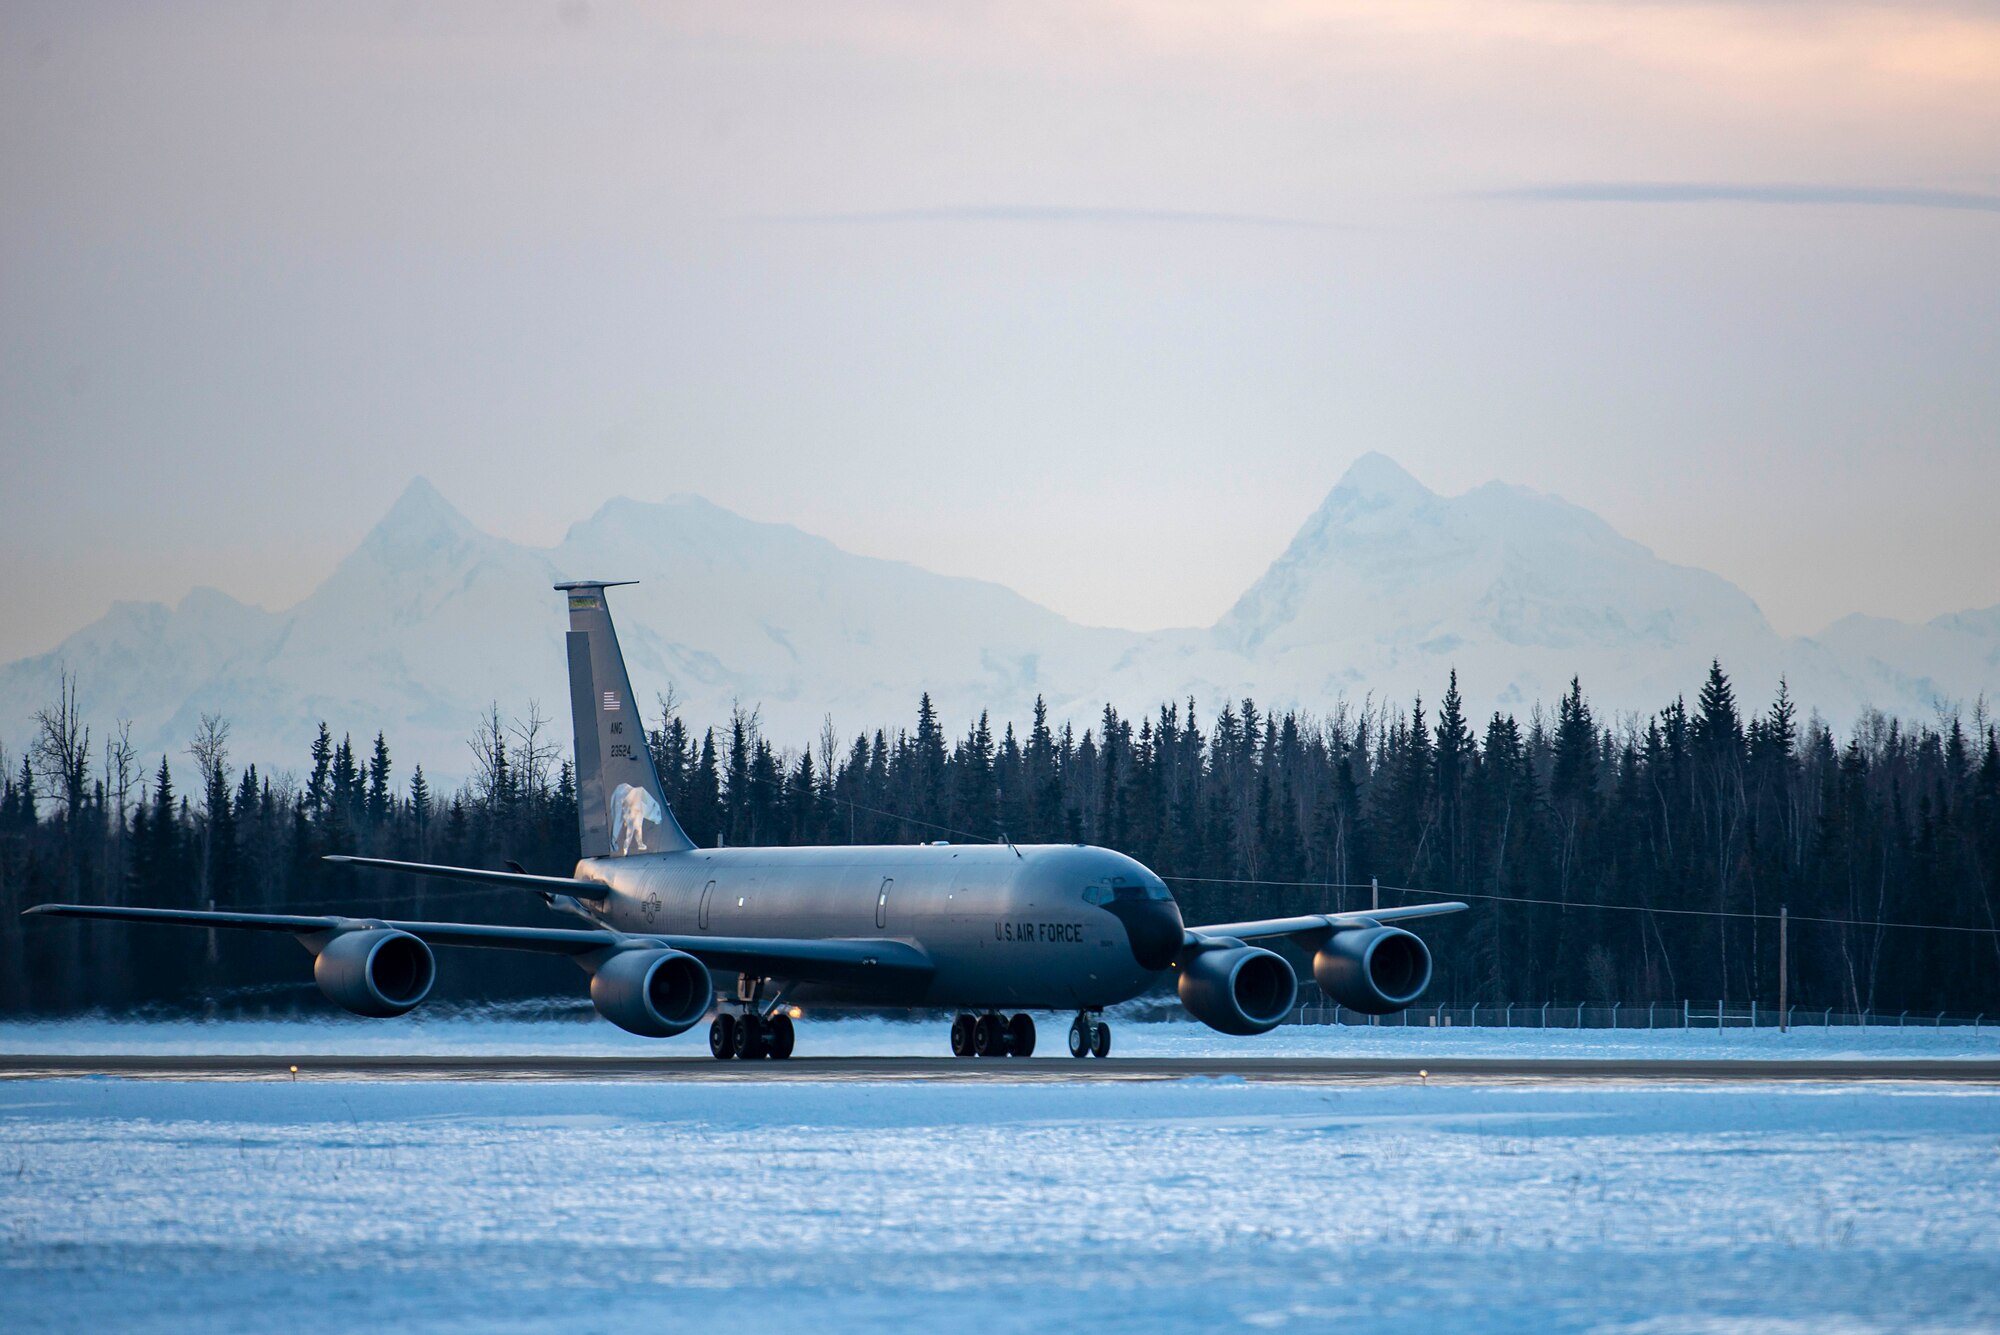 A U.S. Air Force KC-135 Stratotanker from the Alaska Air National Guard’s 168th Wing taxis on the flightline Dec. 18, 2020 at Eielson Air Force Base, Alaska.